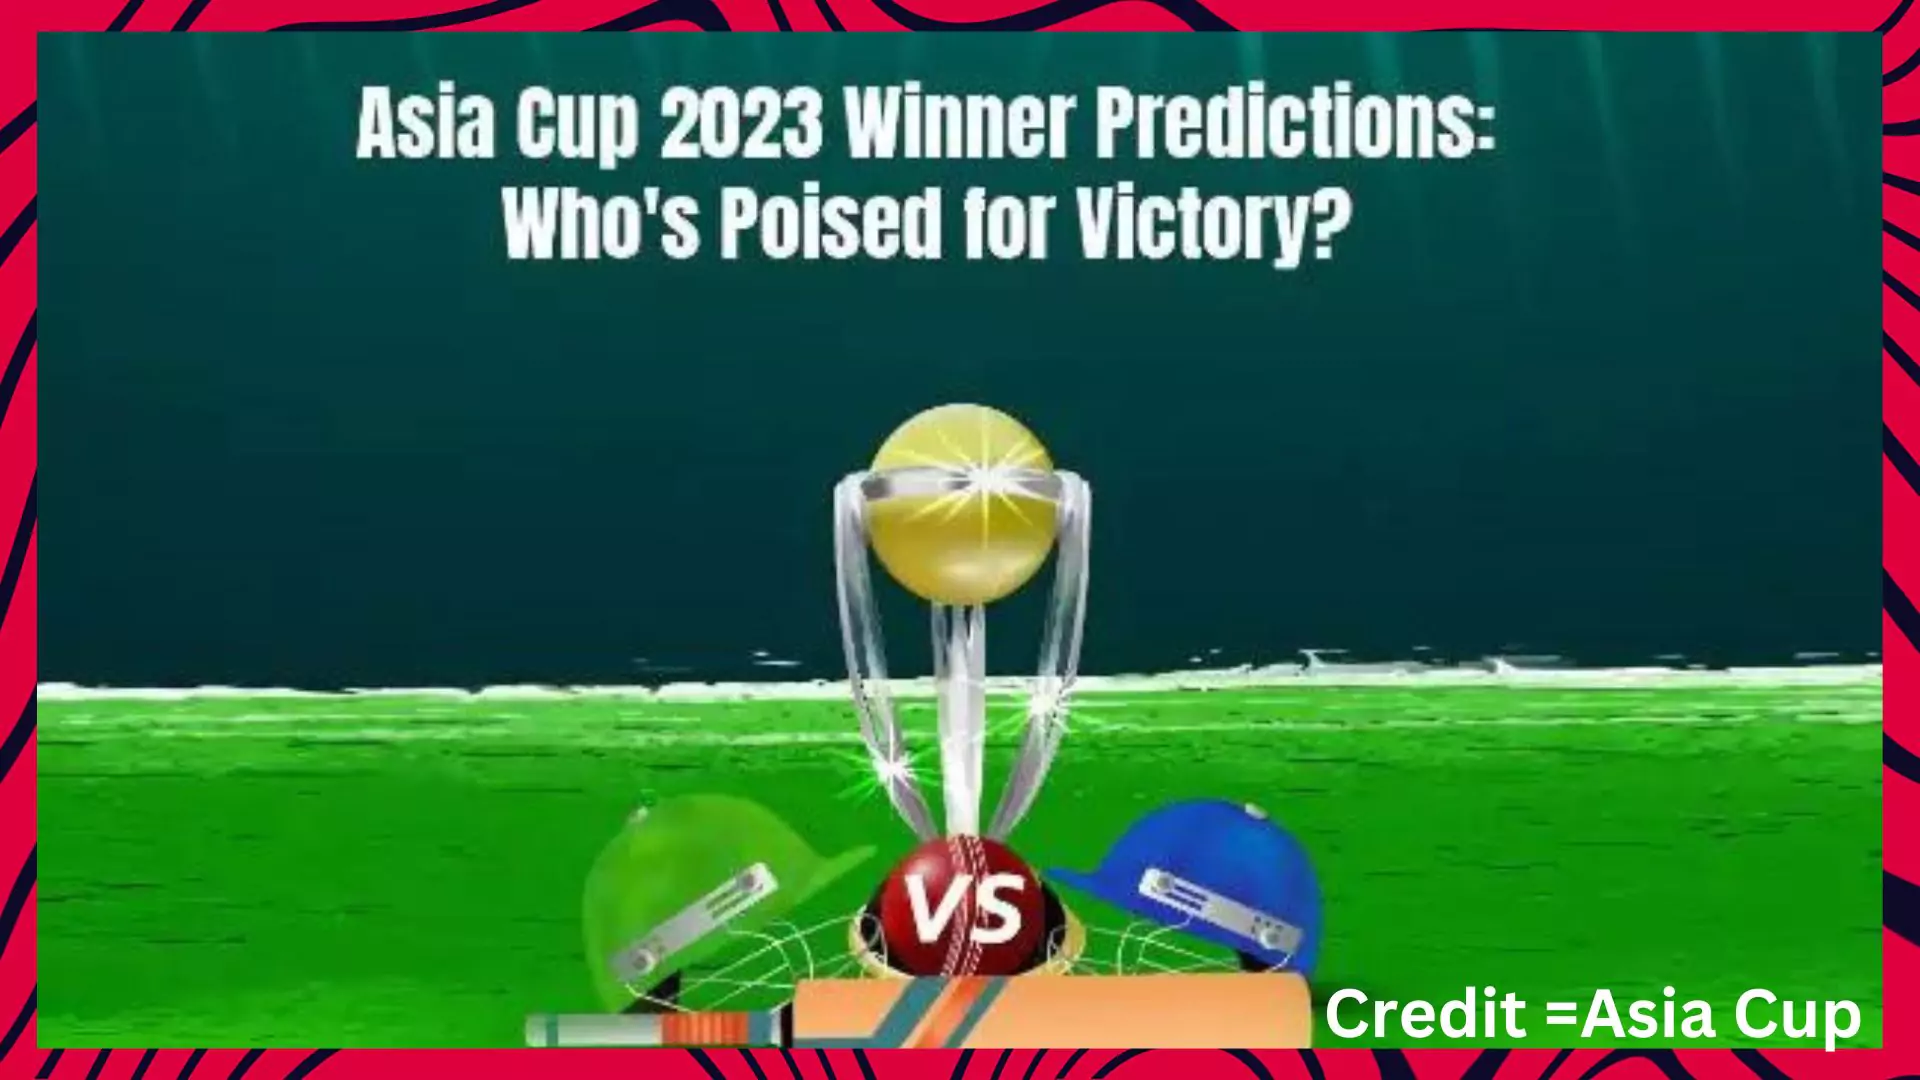 Asia Cup 2023 Winner Predictions: Who's Poised for Victory?